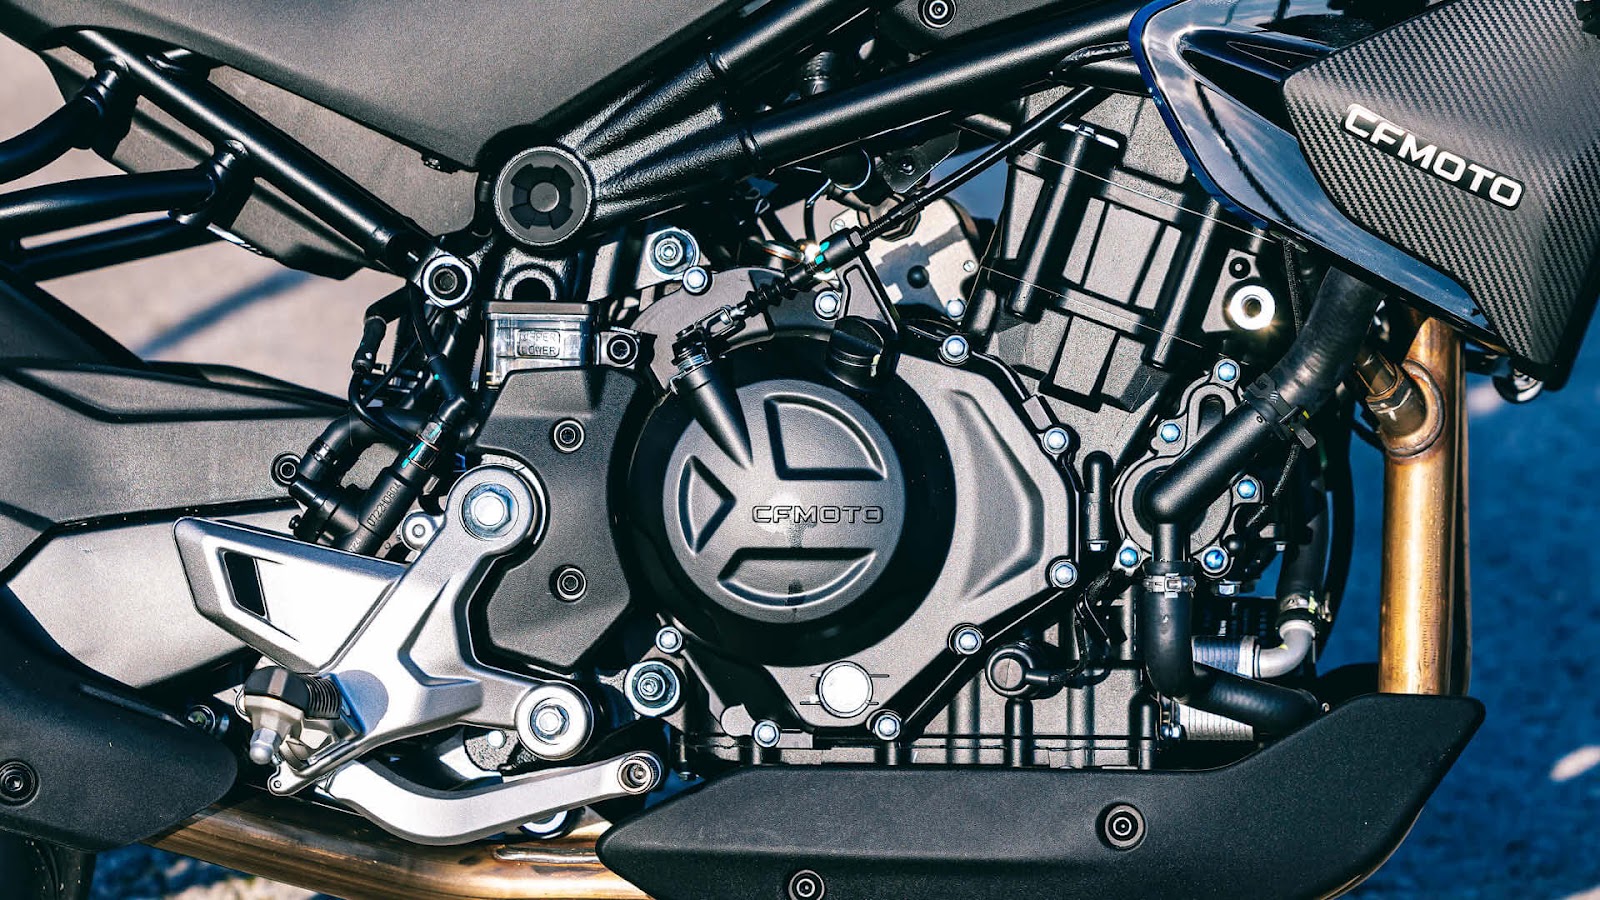 The twin-cylinder engine is practically similar to that of the 450SR sports bike, so we have liveliness and plenty of character in all regimes.